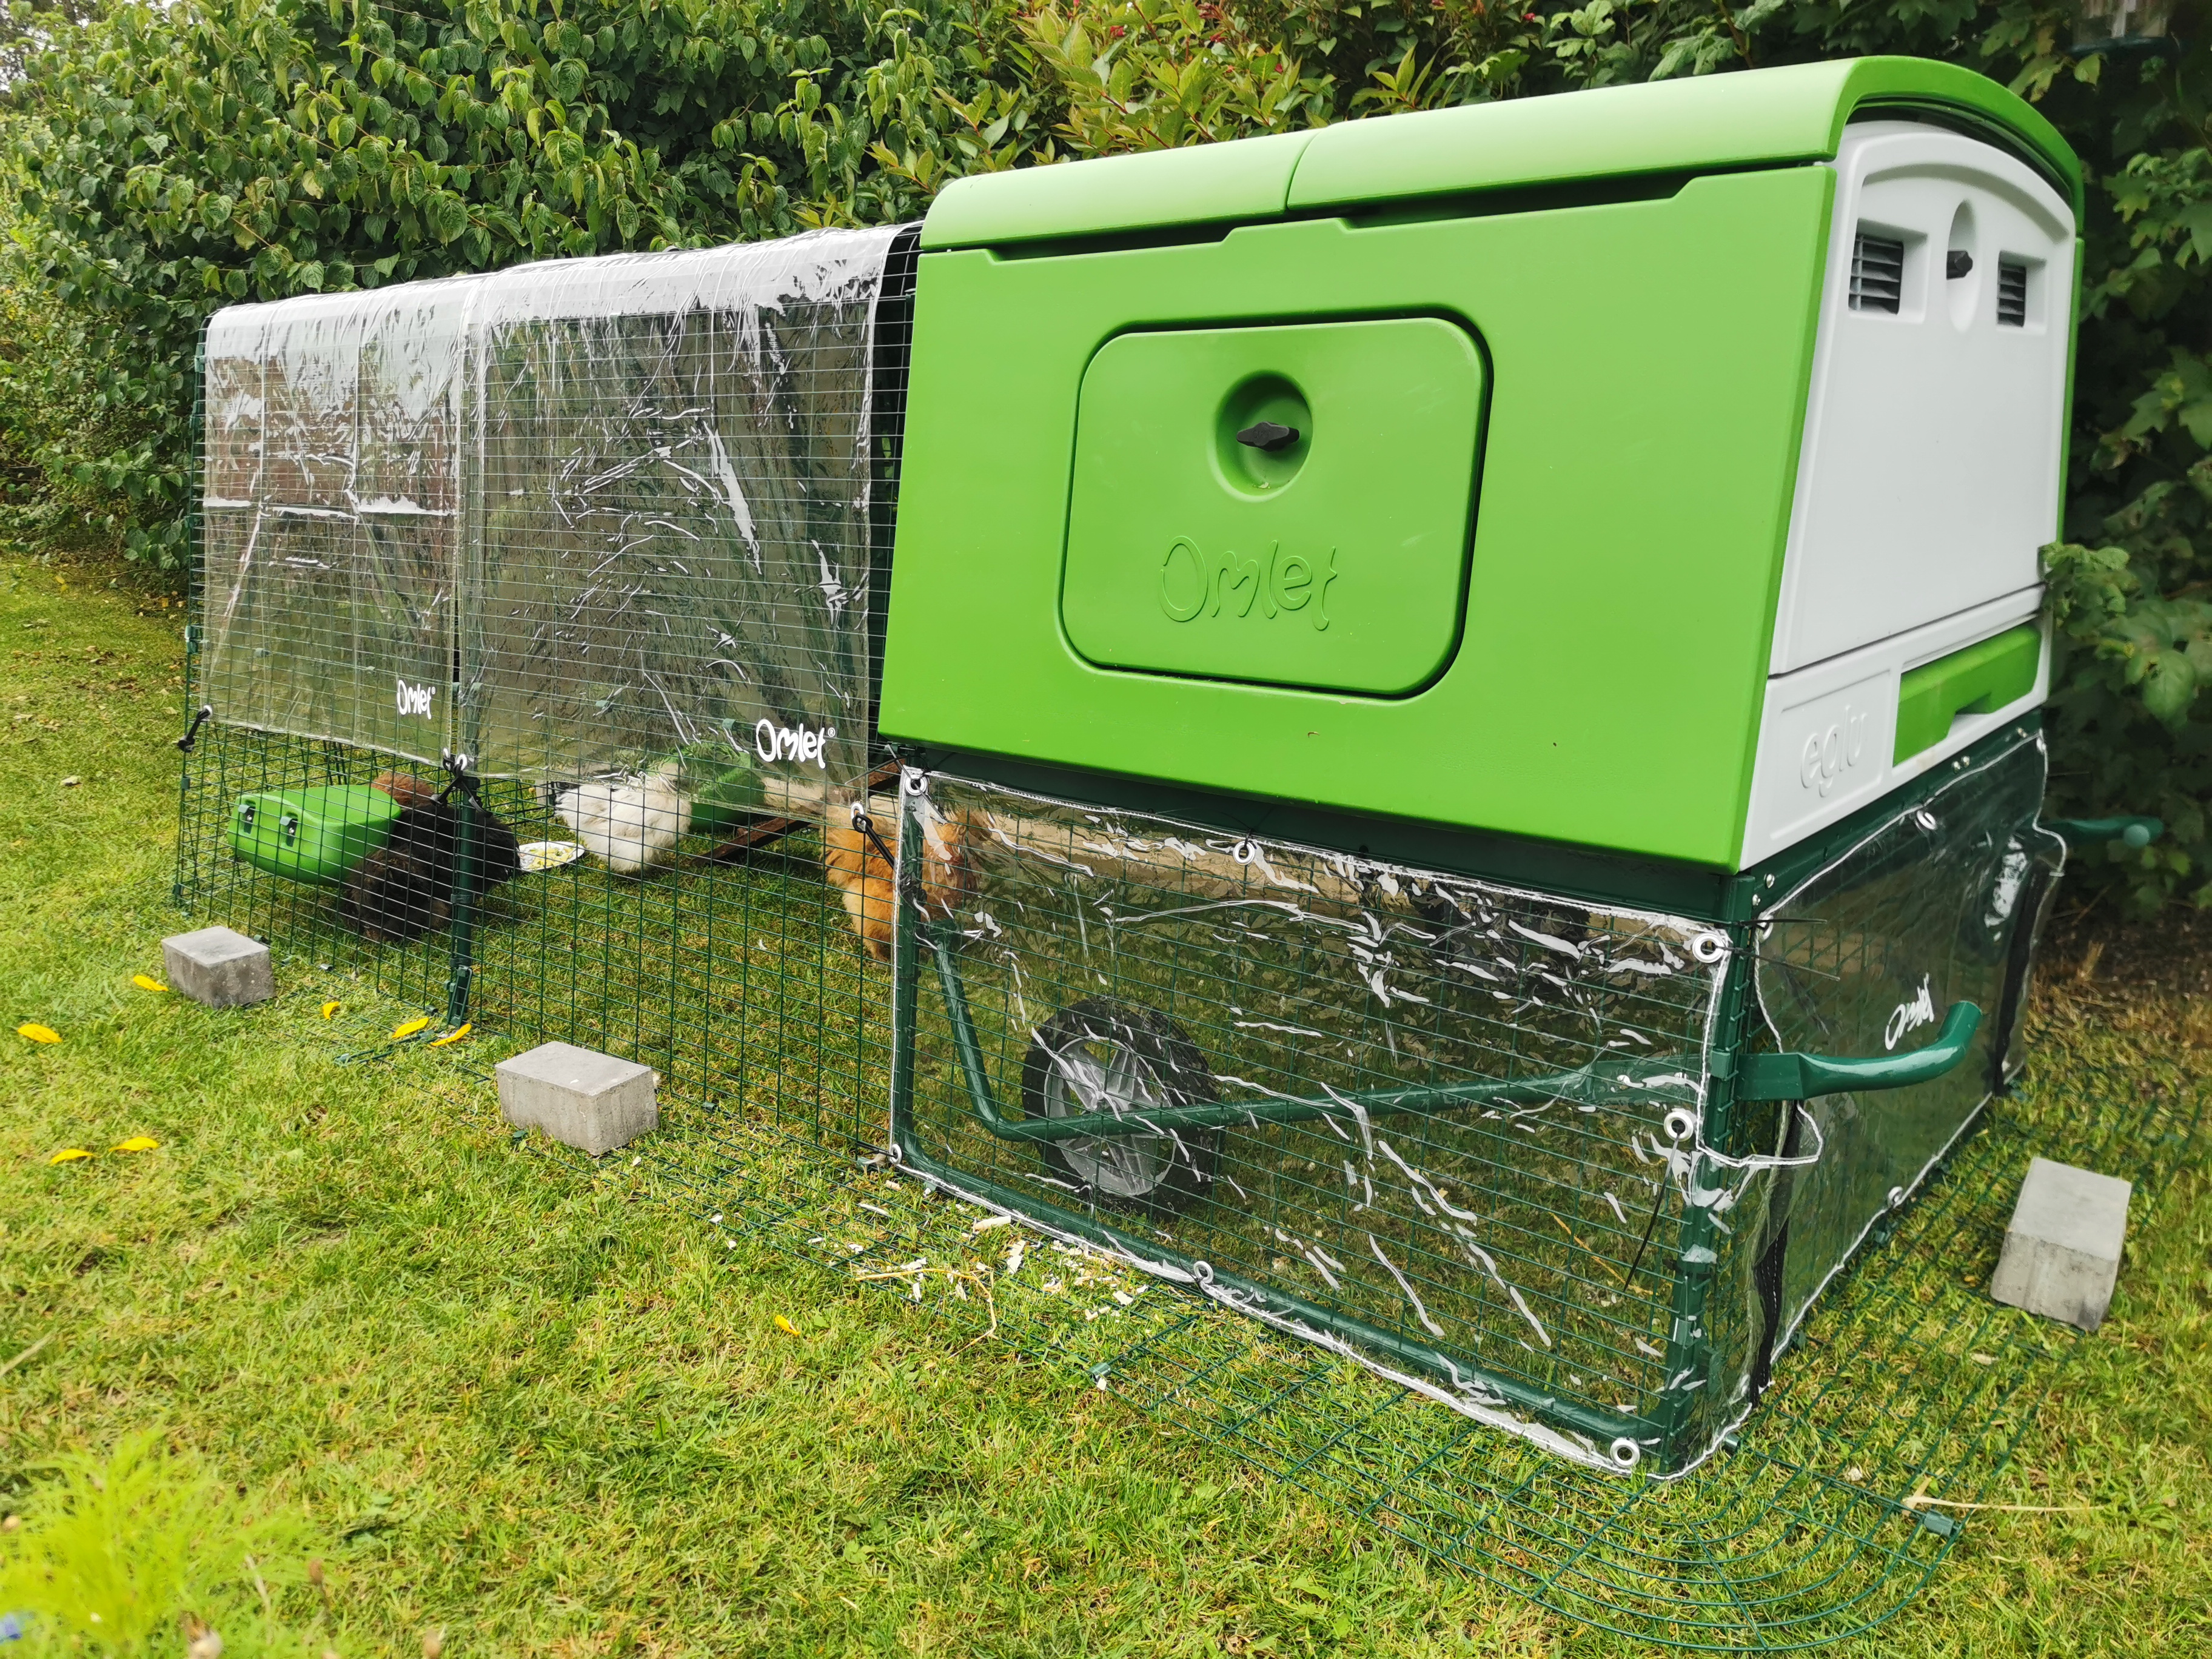 An Eglu Cube coop on grass with transparent covers on the top of its run and on the side